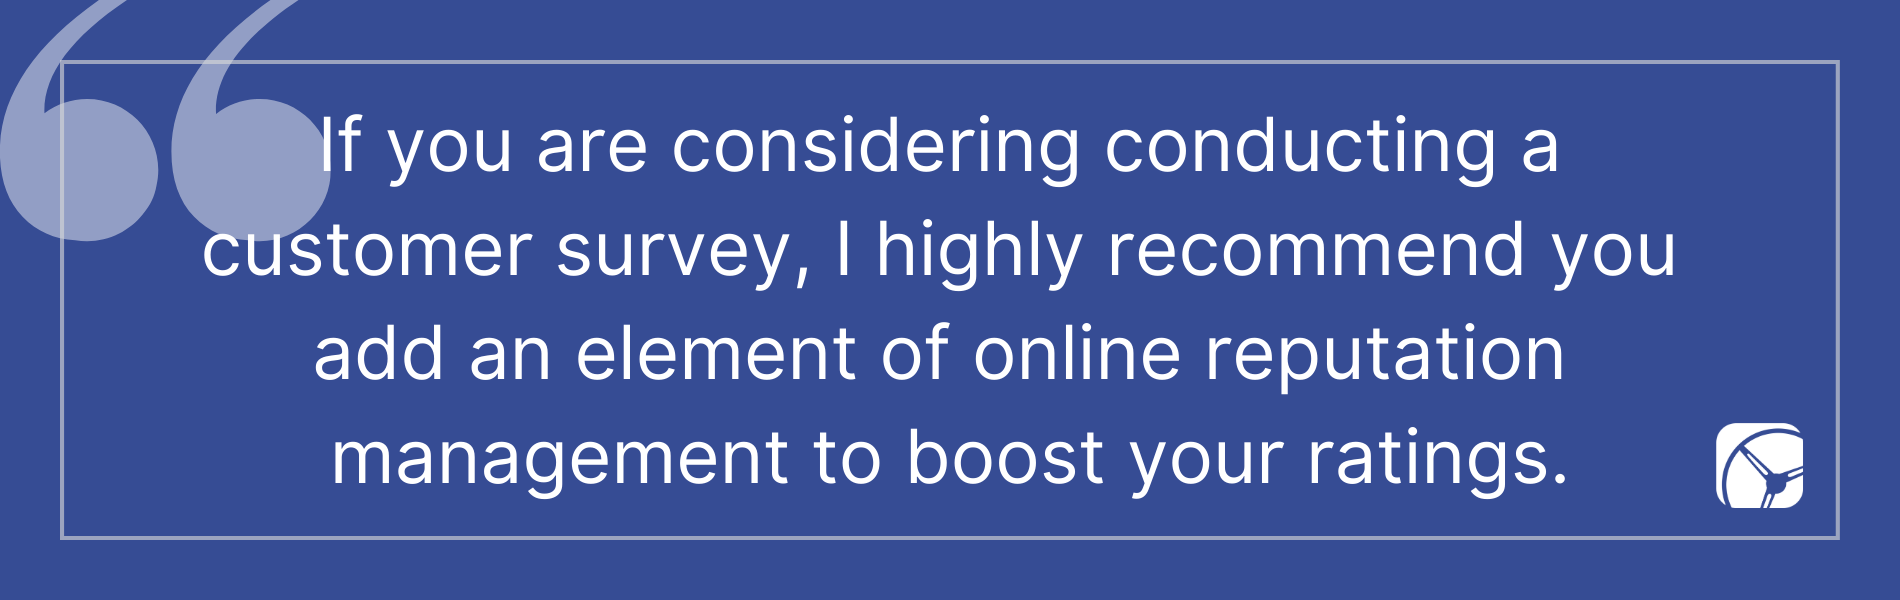 If you are considering conducting a customer survey, I highly recommend you add an element of online reputation management to boost your ratings.